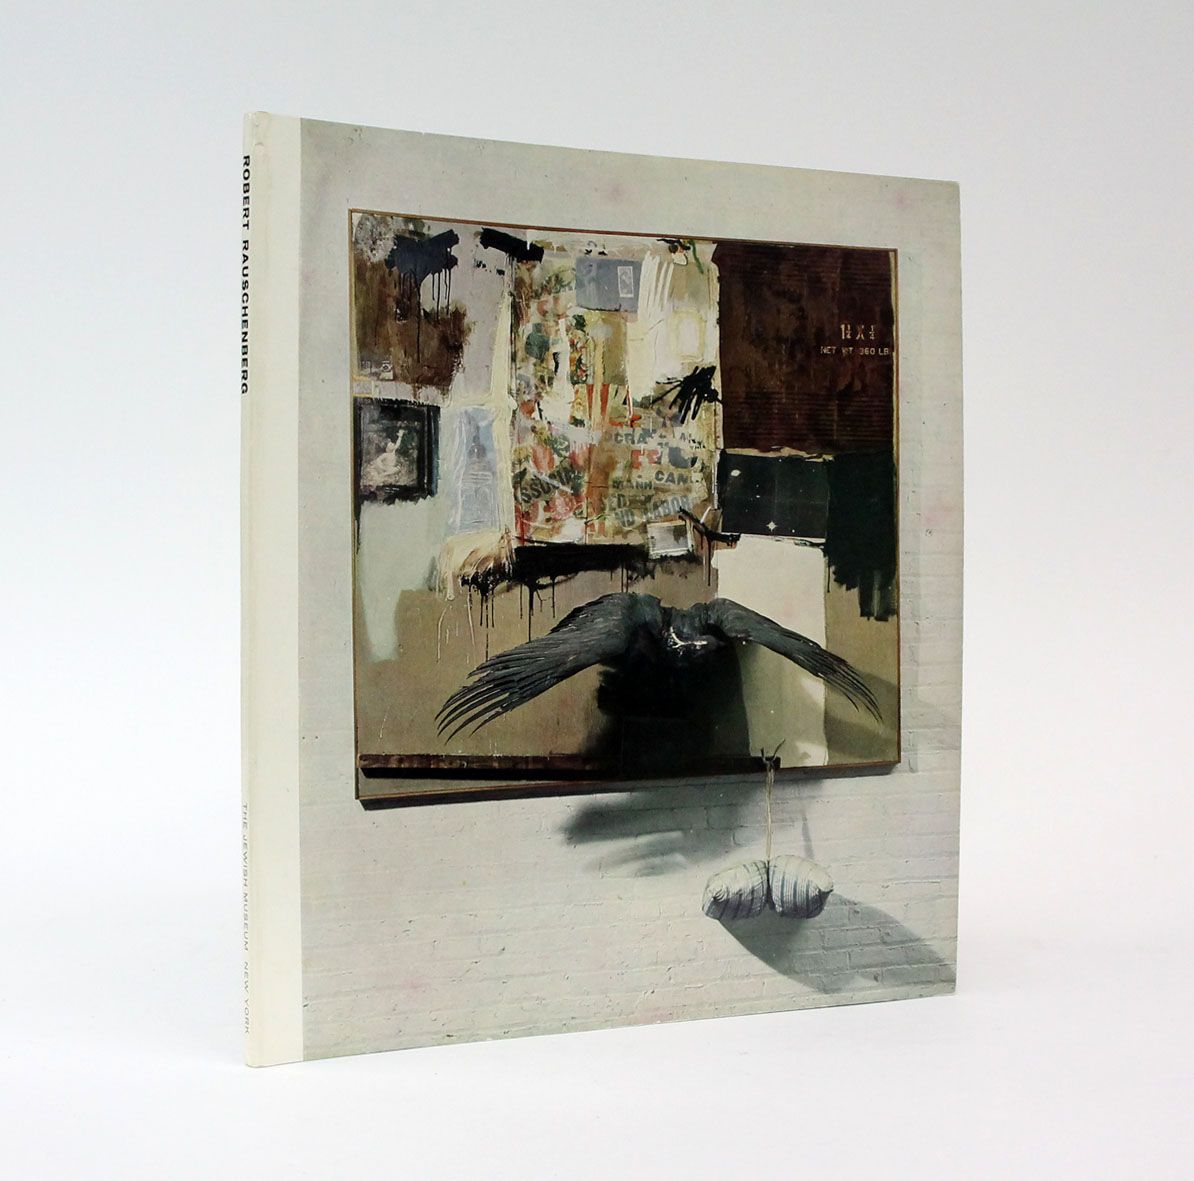 ROBERT RAUSCHENBERG. A Signed Exhibition Catalogue for the Artist's first Major Museum Retrospective. -  image 1